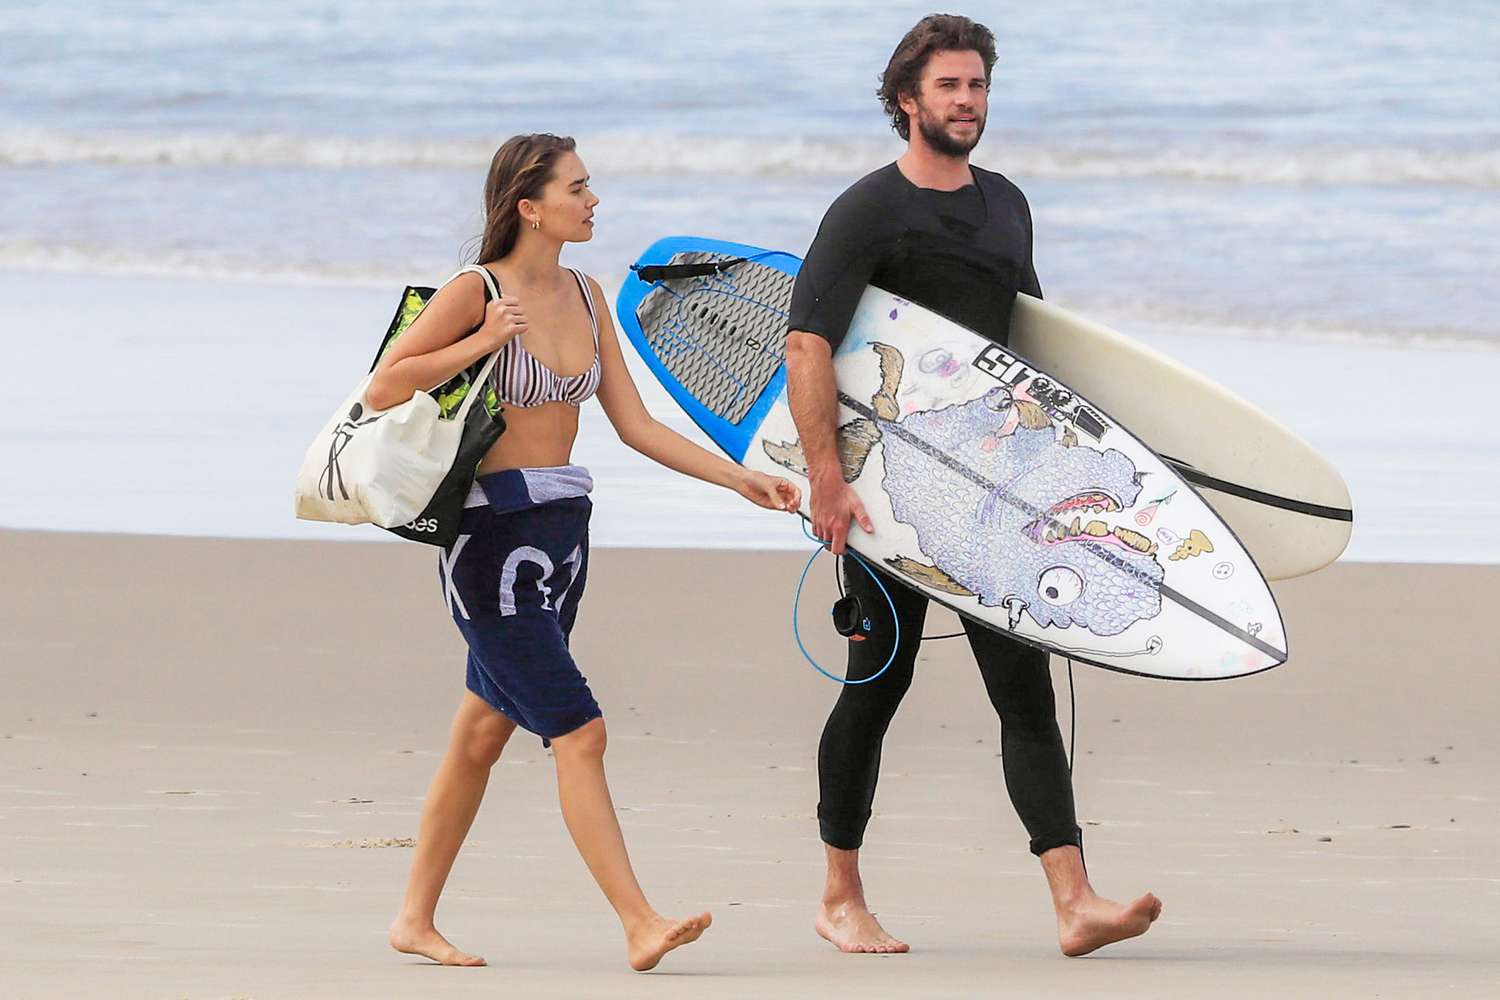 Surfs Up for Chris & Liam Hemsworth! The Hemsworth brothers reunite in Byron Bay, with Liam's bikini-clad girlfriend, model Gabriella Brooks, along for the action!